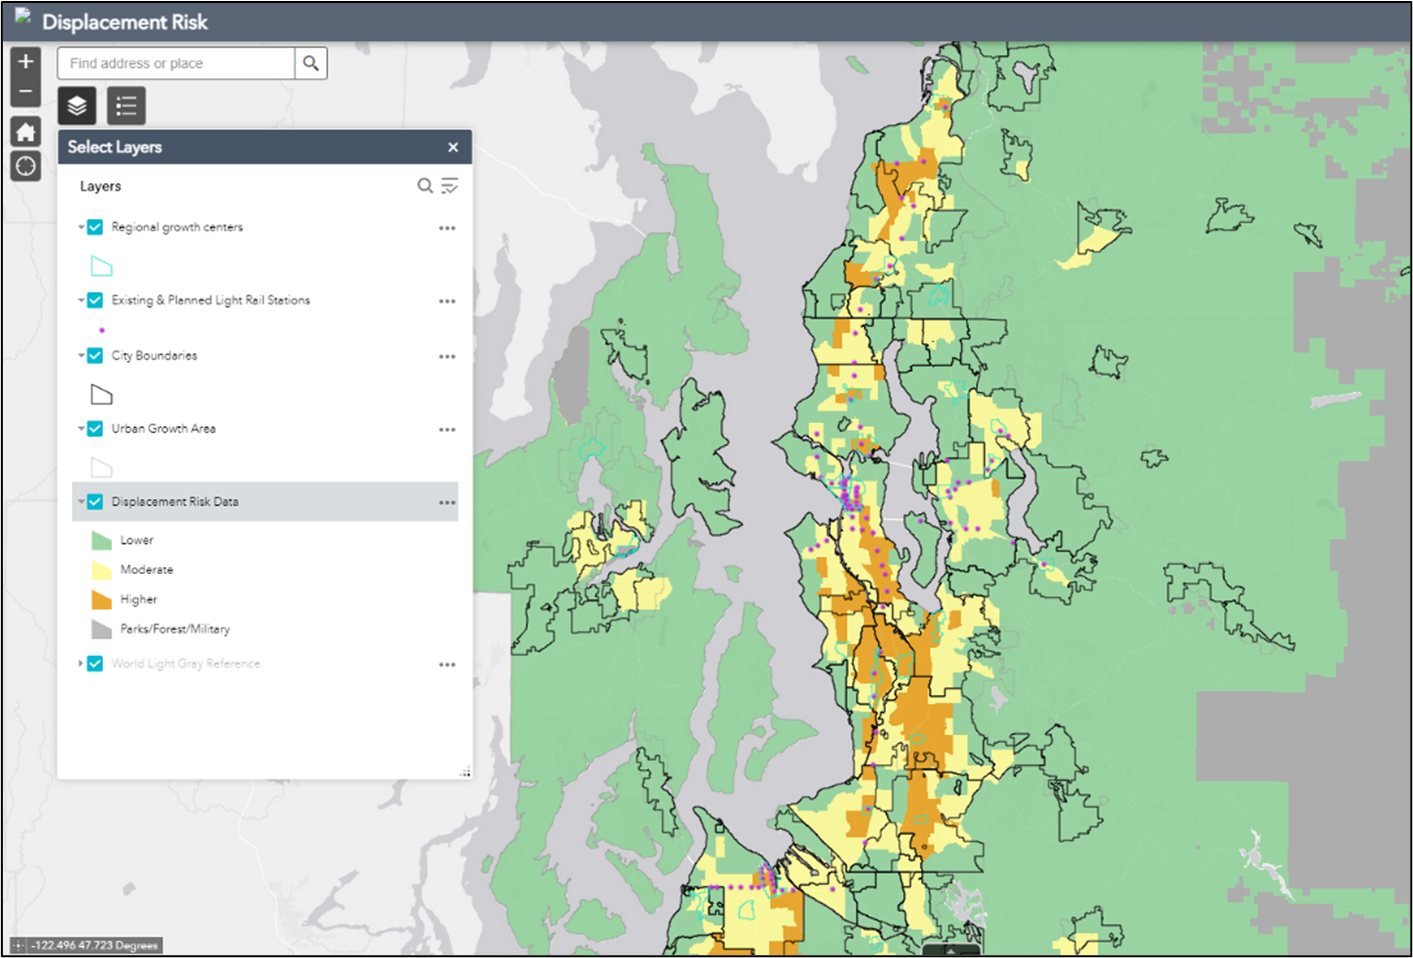 Screenshot of the Displacement Risk Mapping Tool